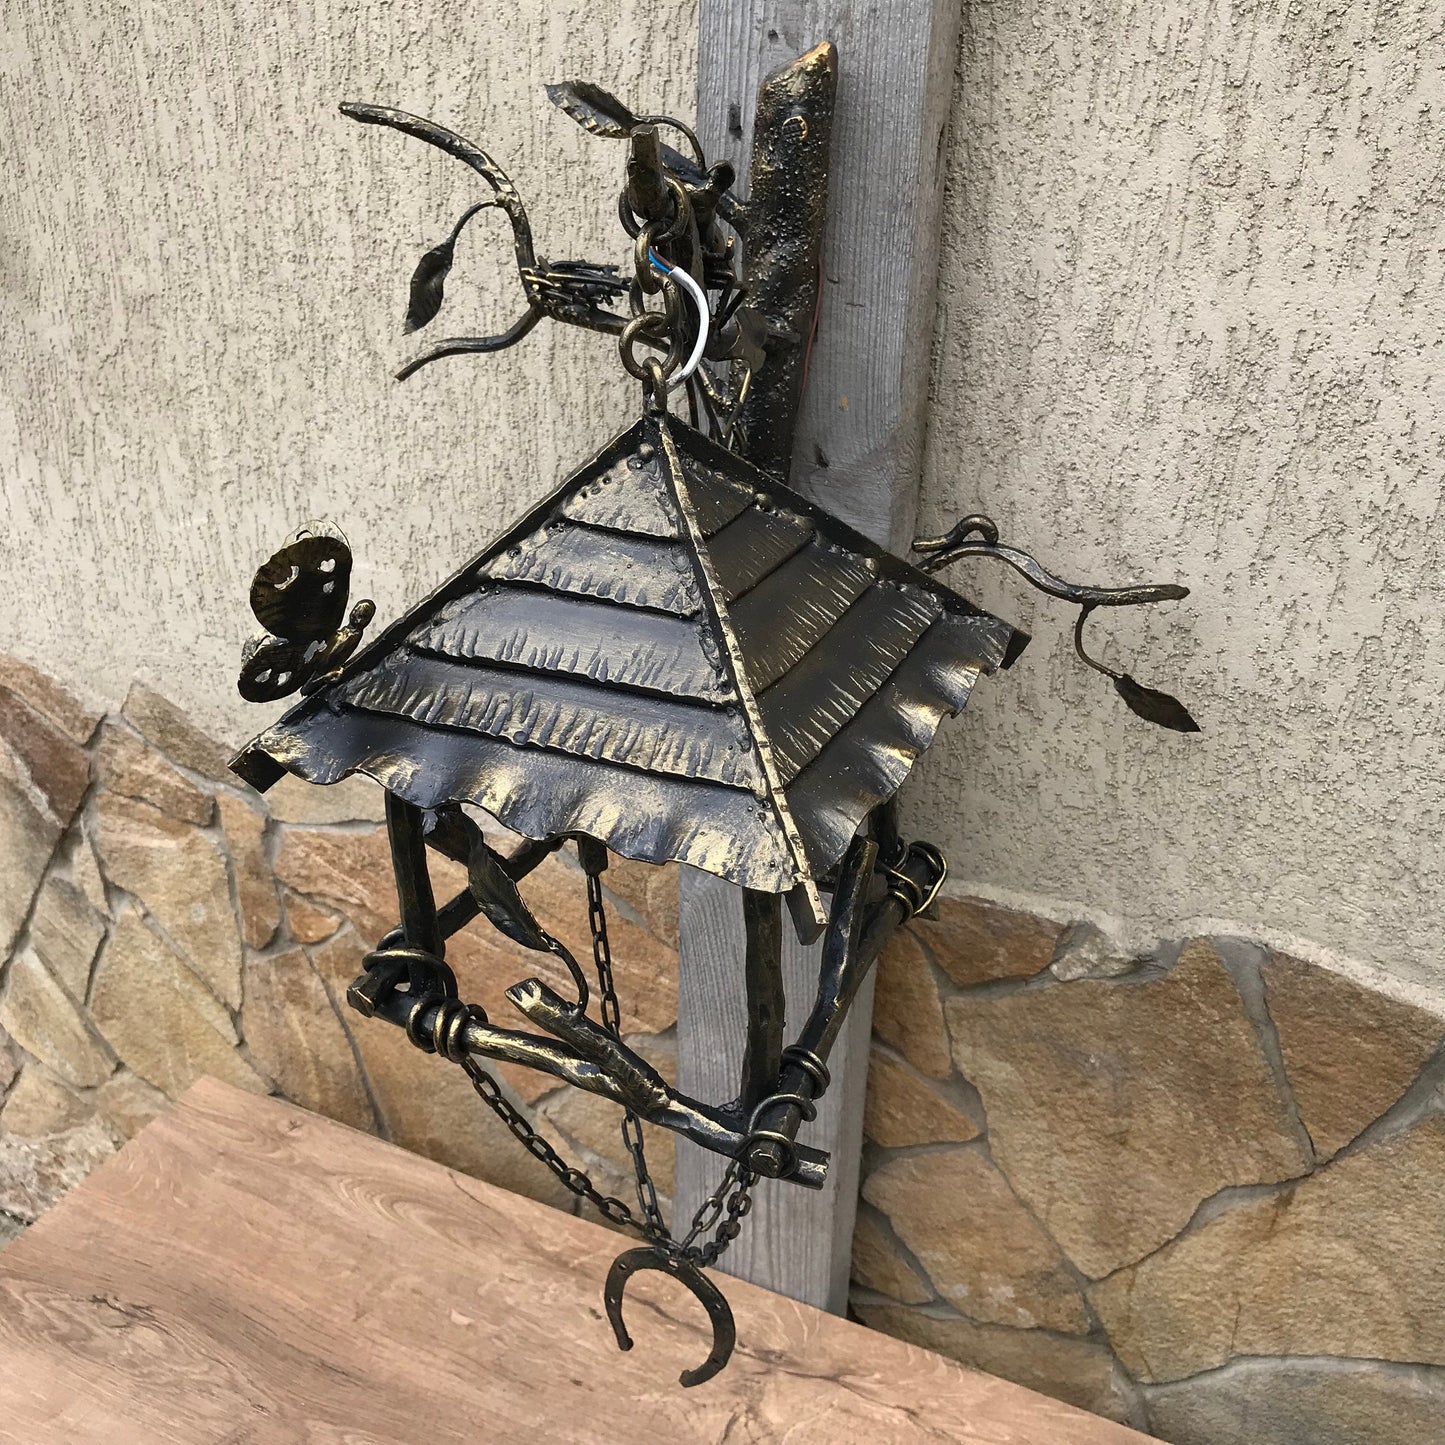 Wall sconce, sconce, wall lamp, garden lamp, porch lamp, light fixture, sconce light, garden lantern, lantern,sconce lighting,sconce lantern